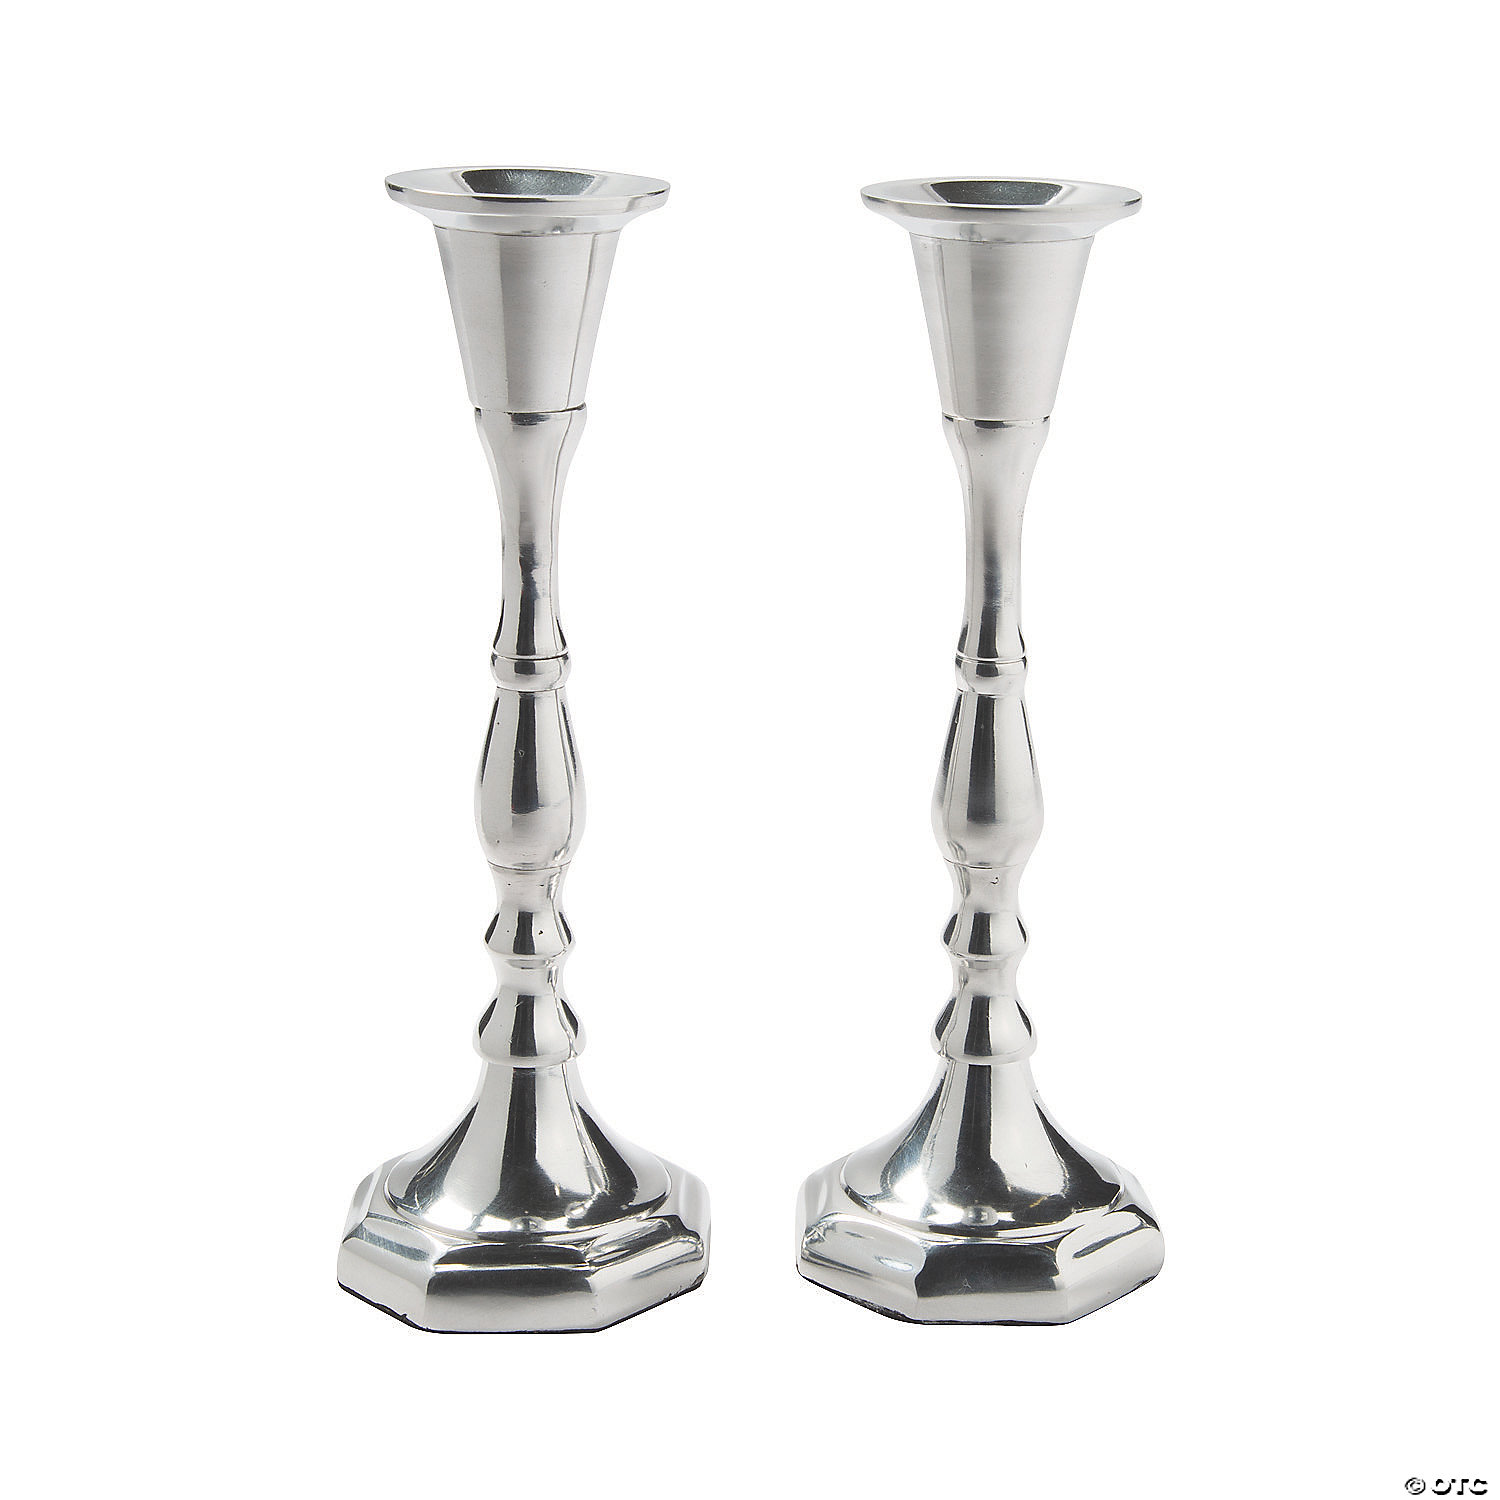 pair of candlesticks Two lovely candle holders